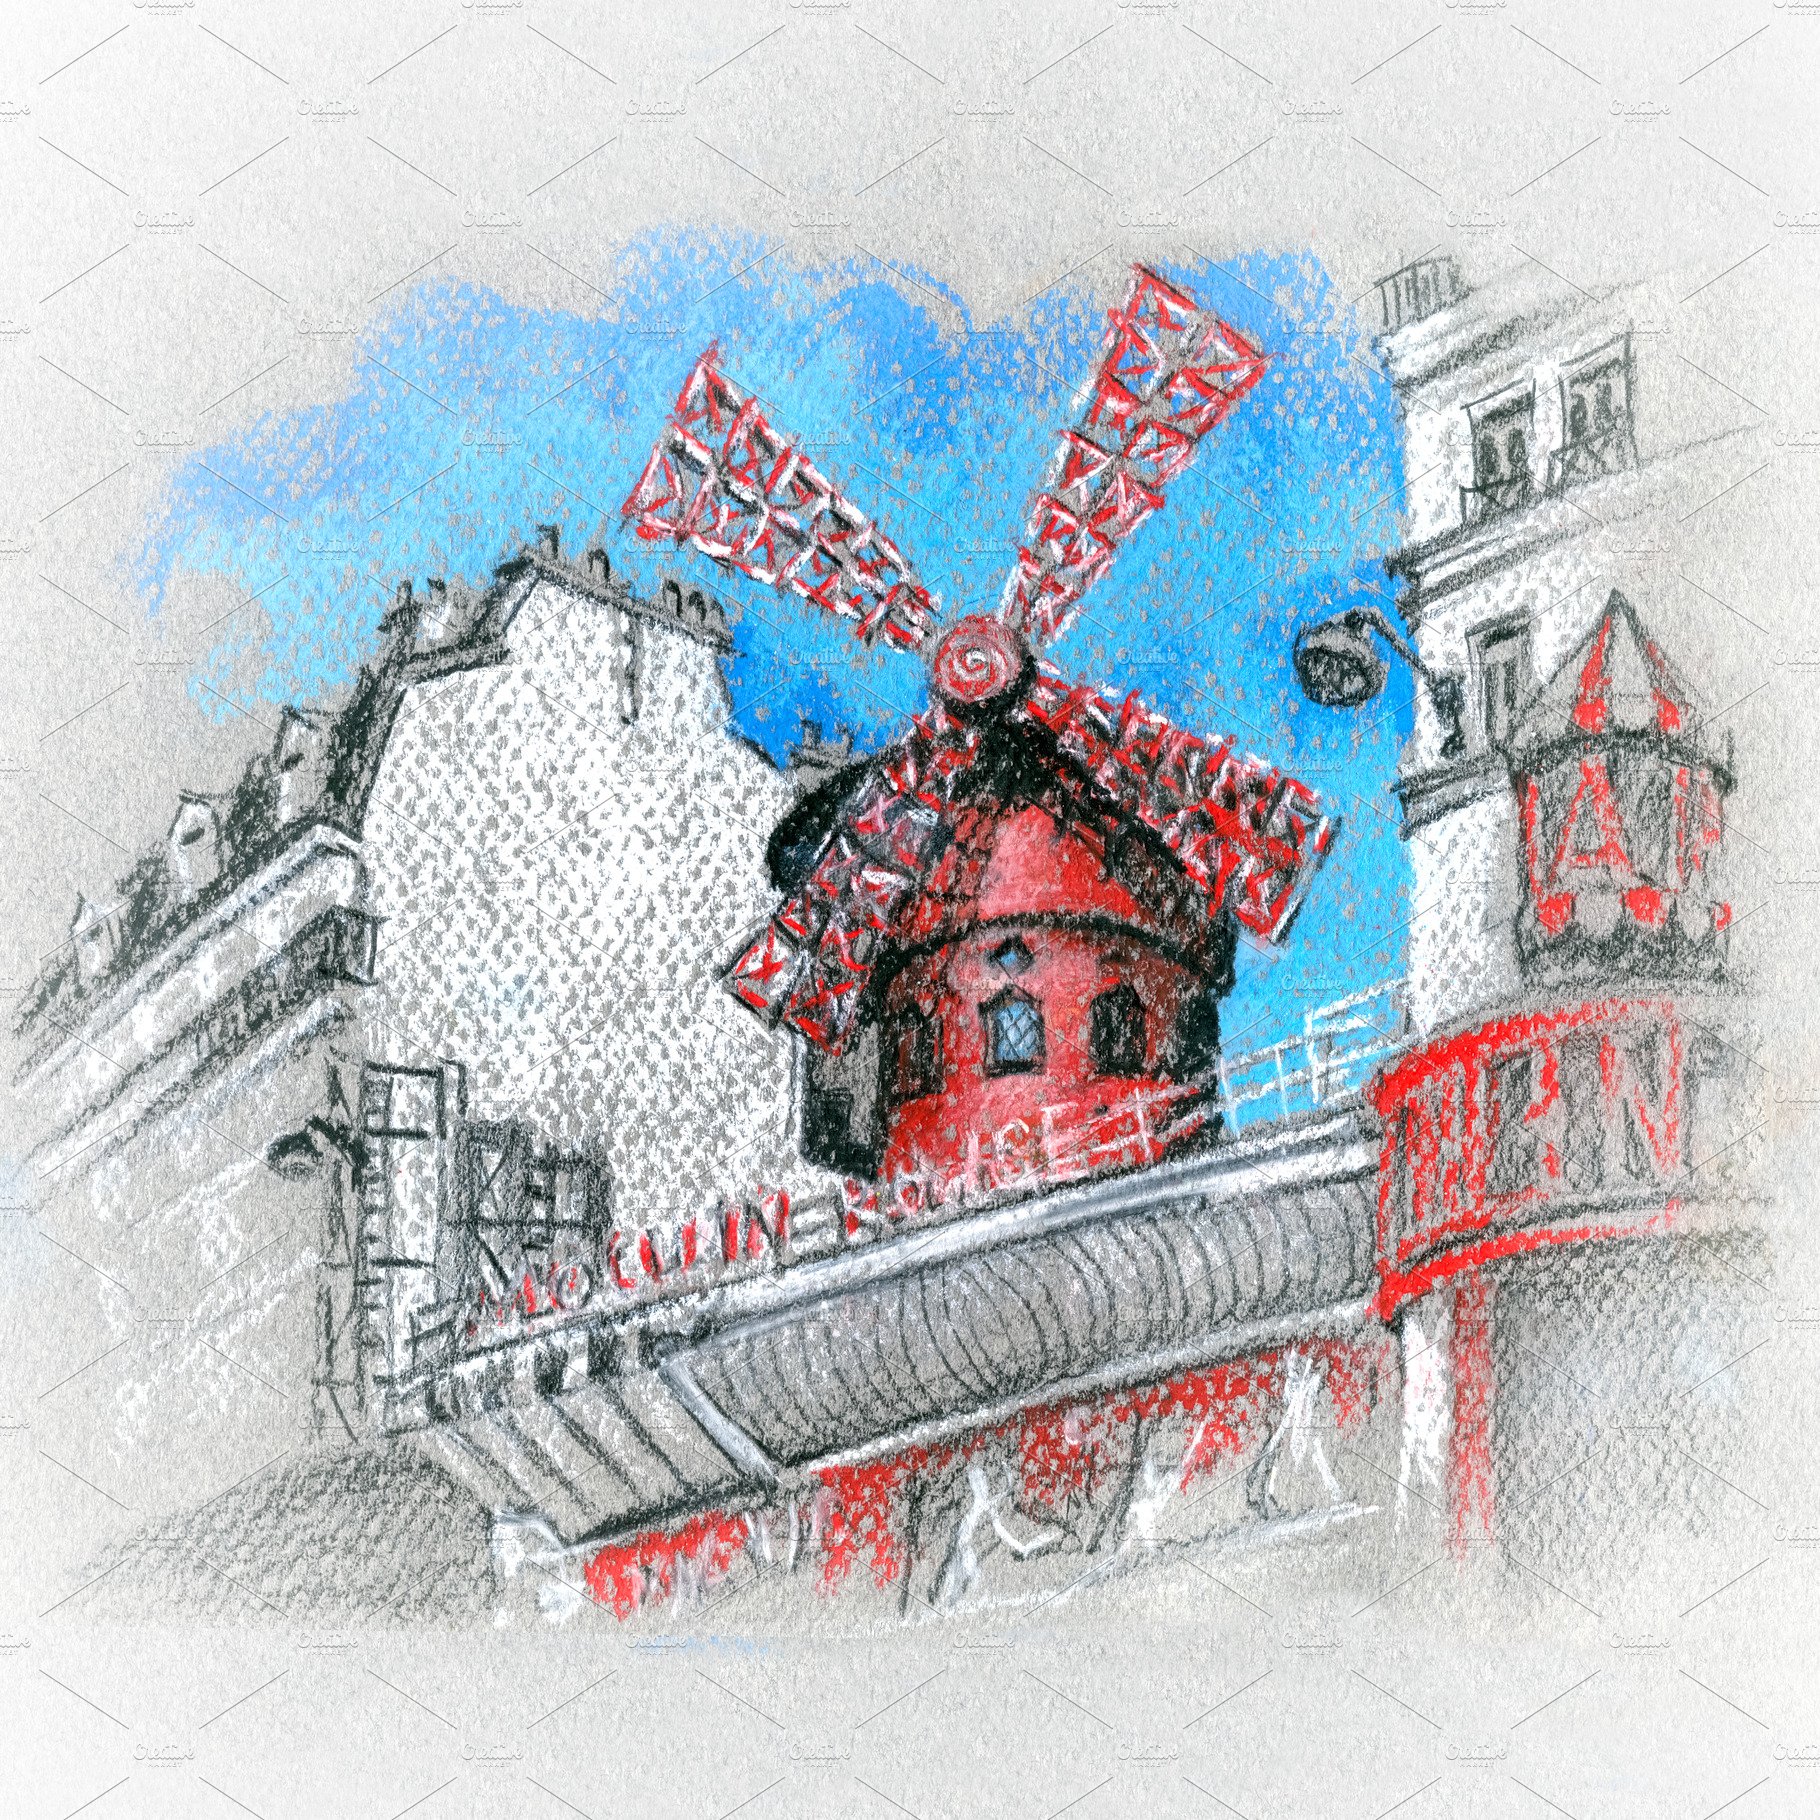 Moulin Rouge in Paris, France cover image.